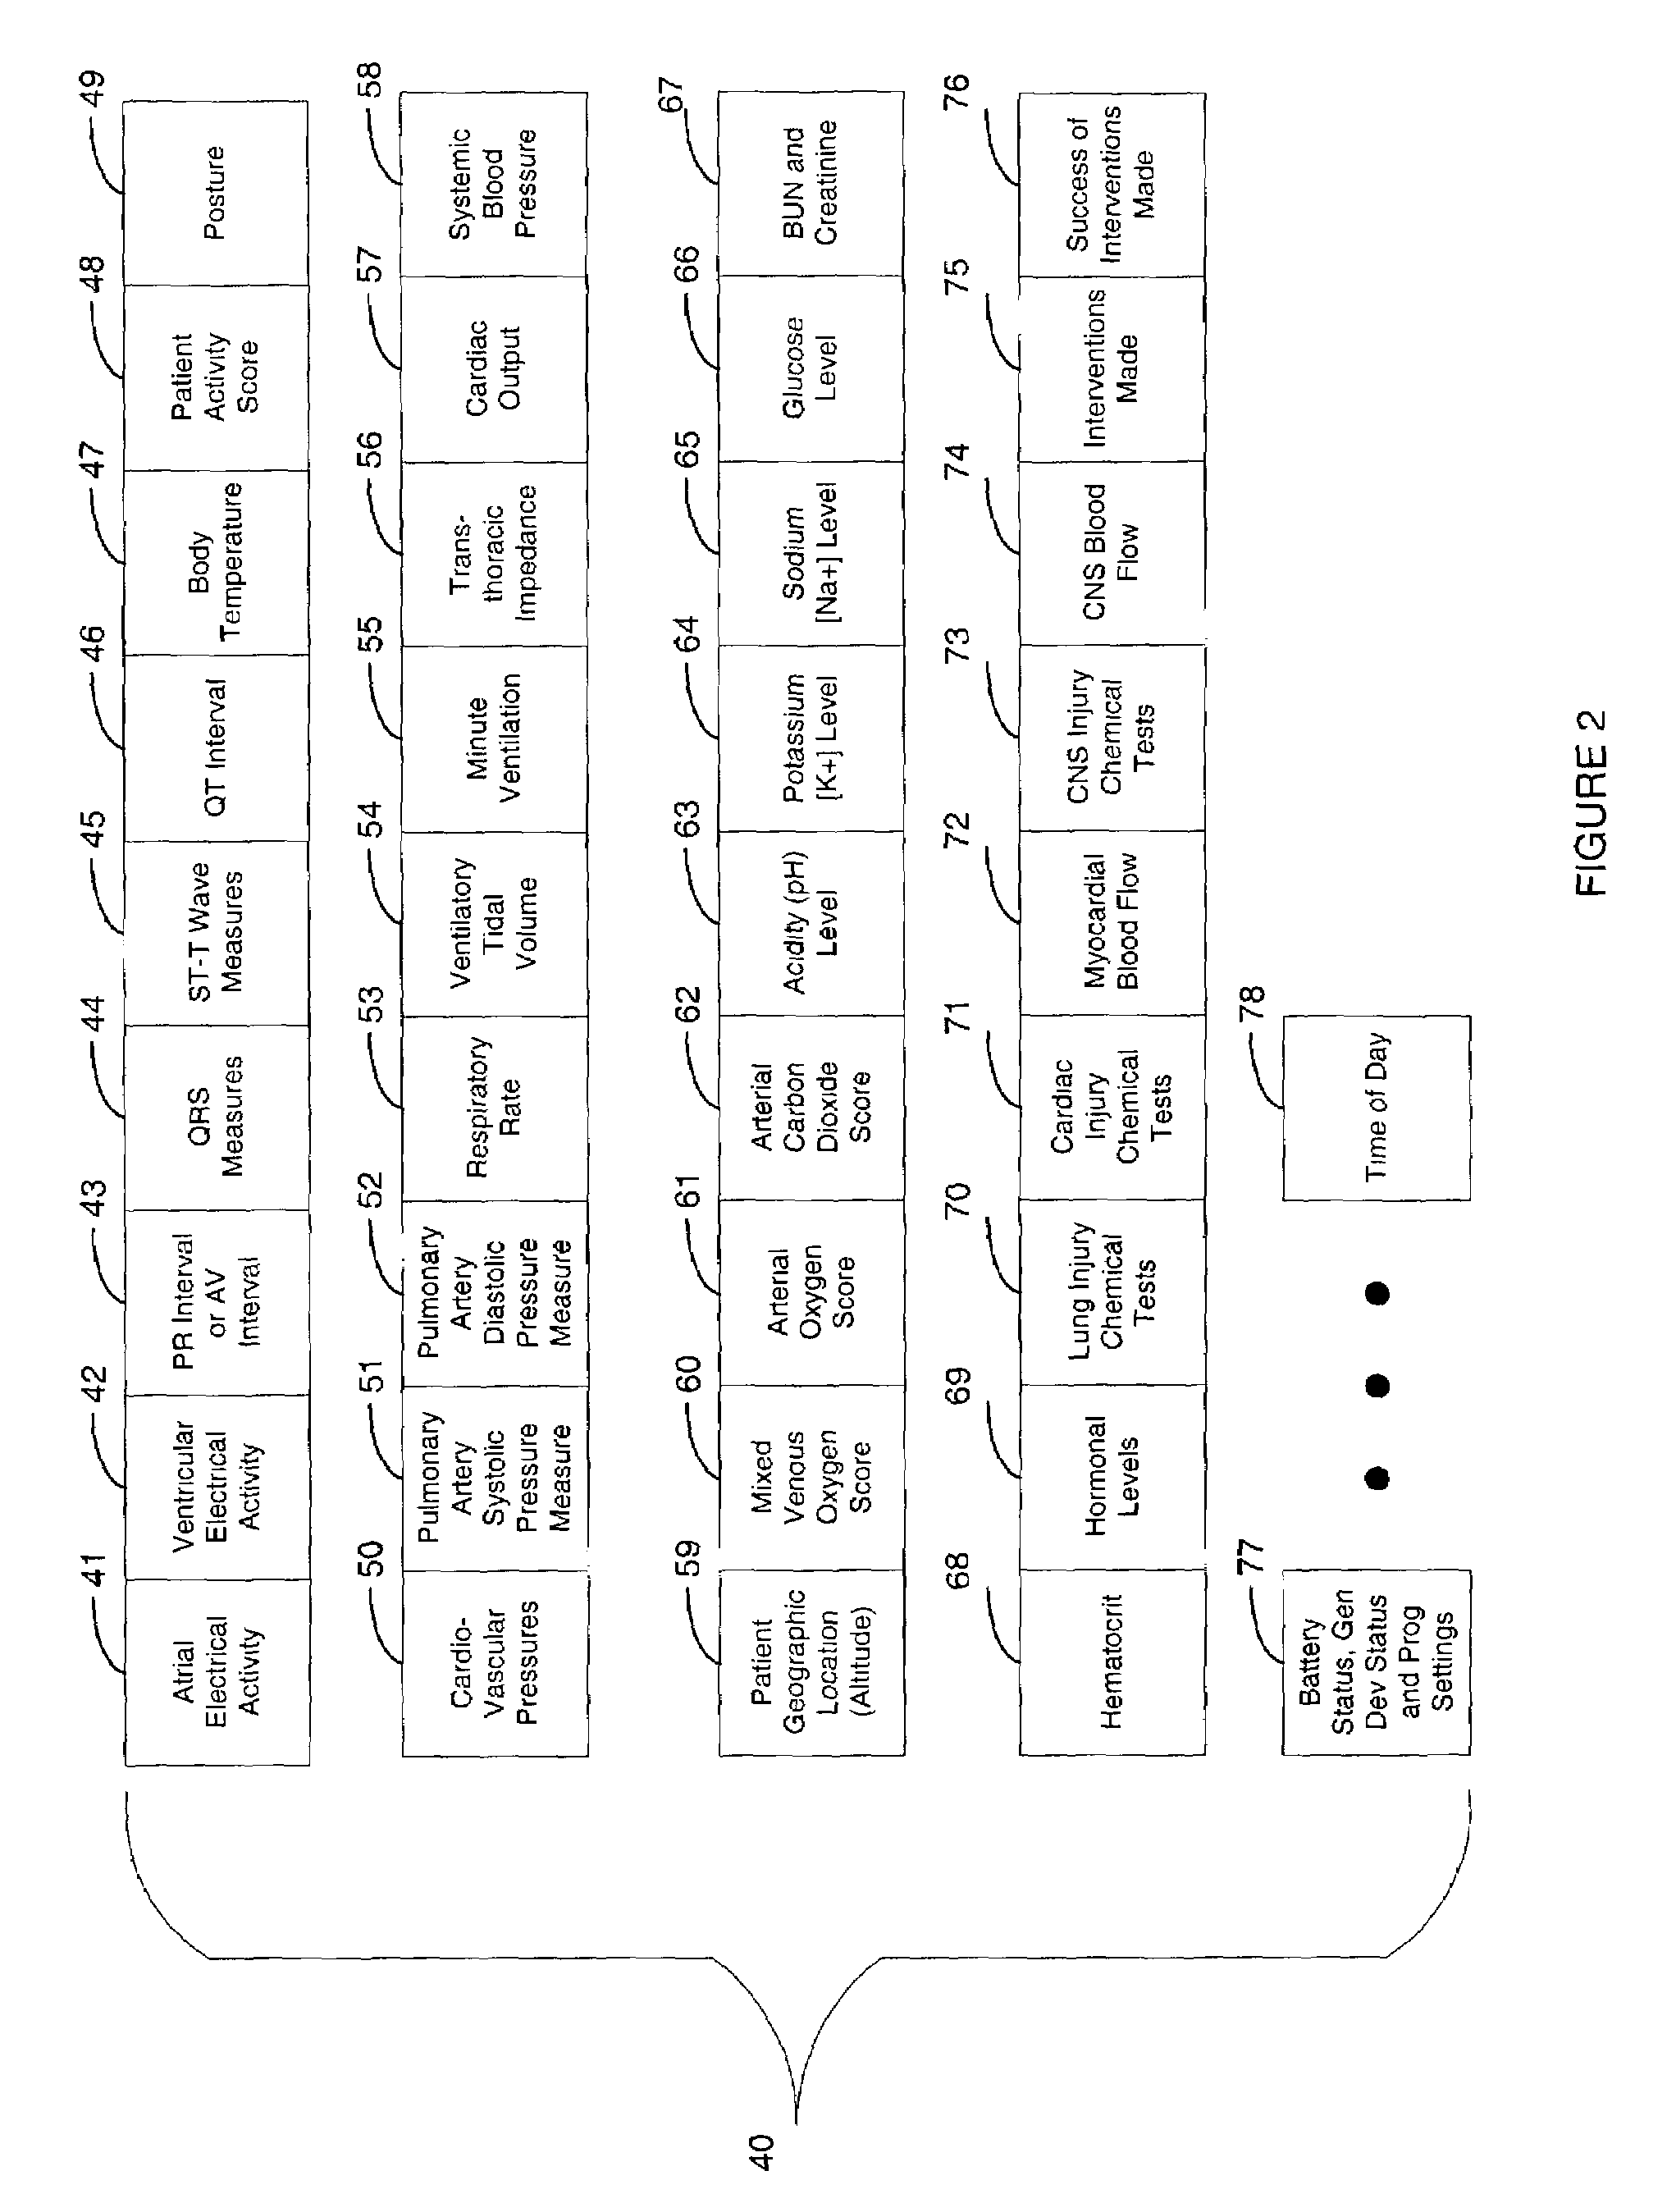 System and method for providing diagnosis and monitoring of respiratory insufficiency for use in automated patient care